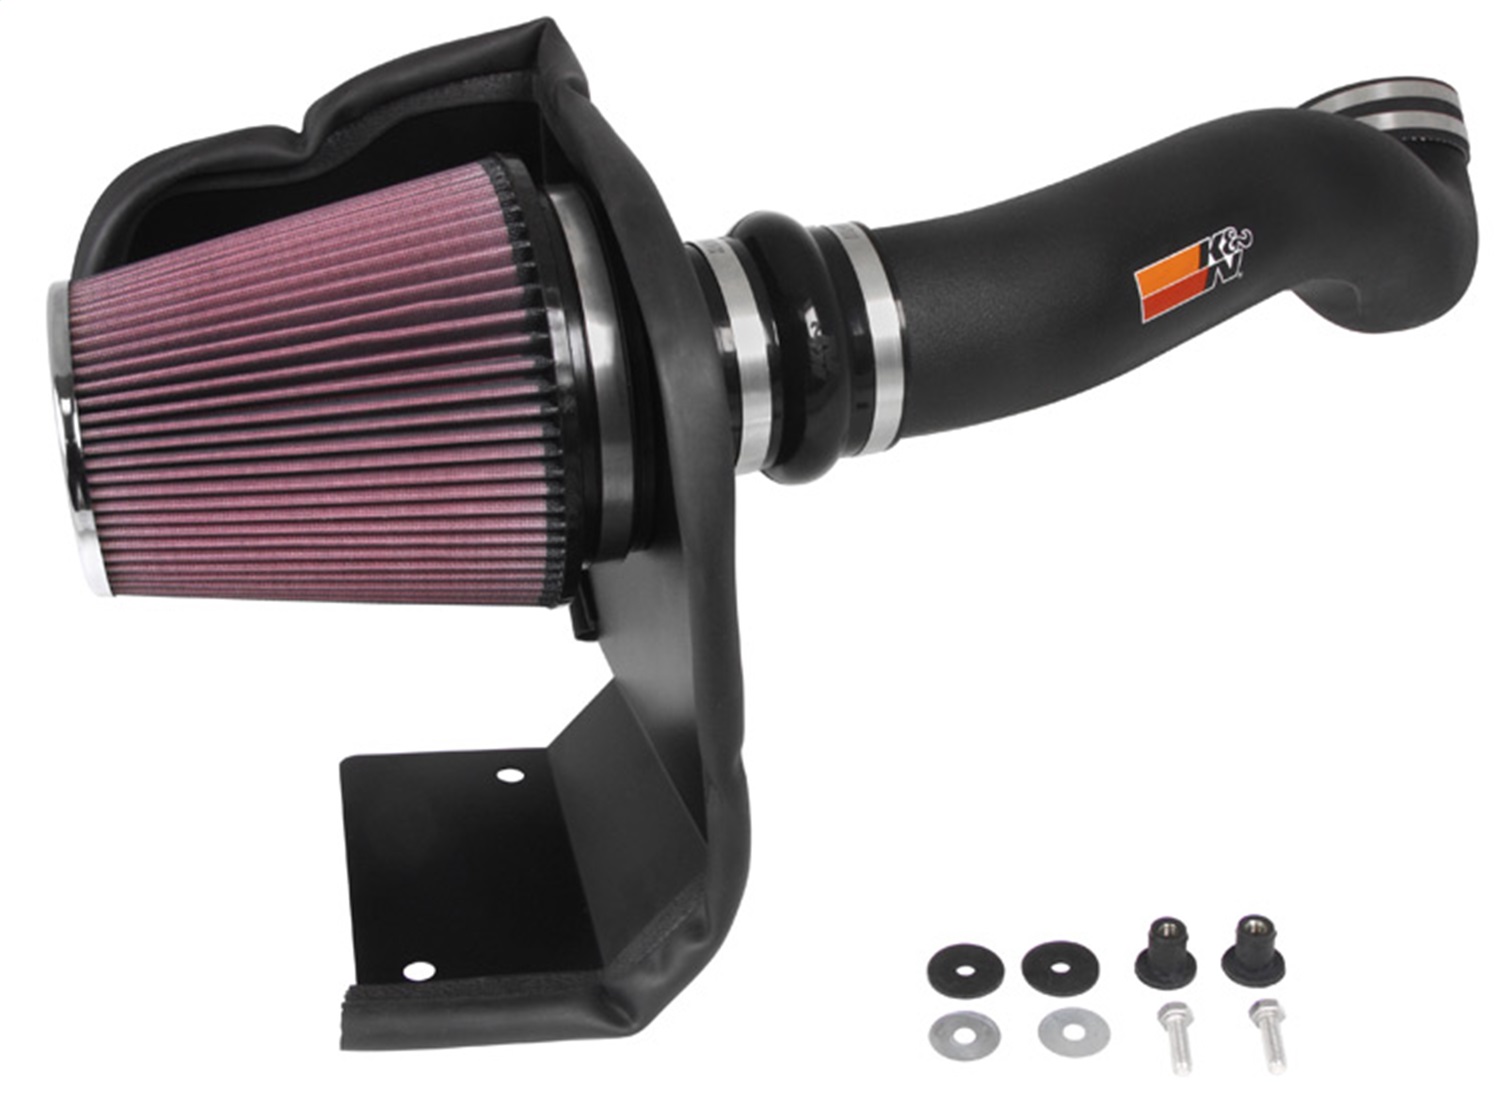 K&N Filters K&N Filters 57-3033 Filtercharger Injection Performance Kit Fits Avalanche 1500